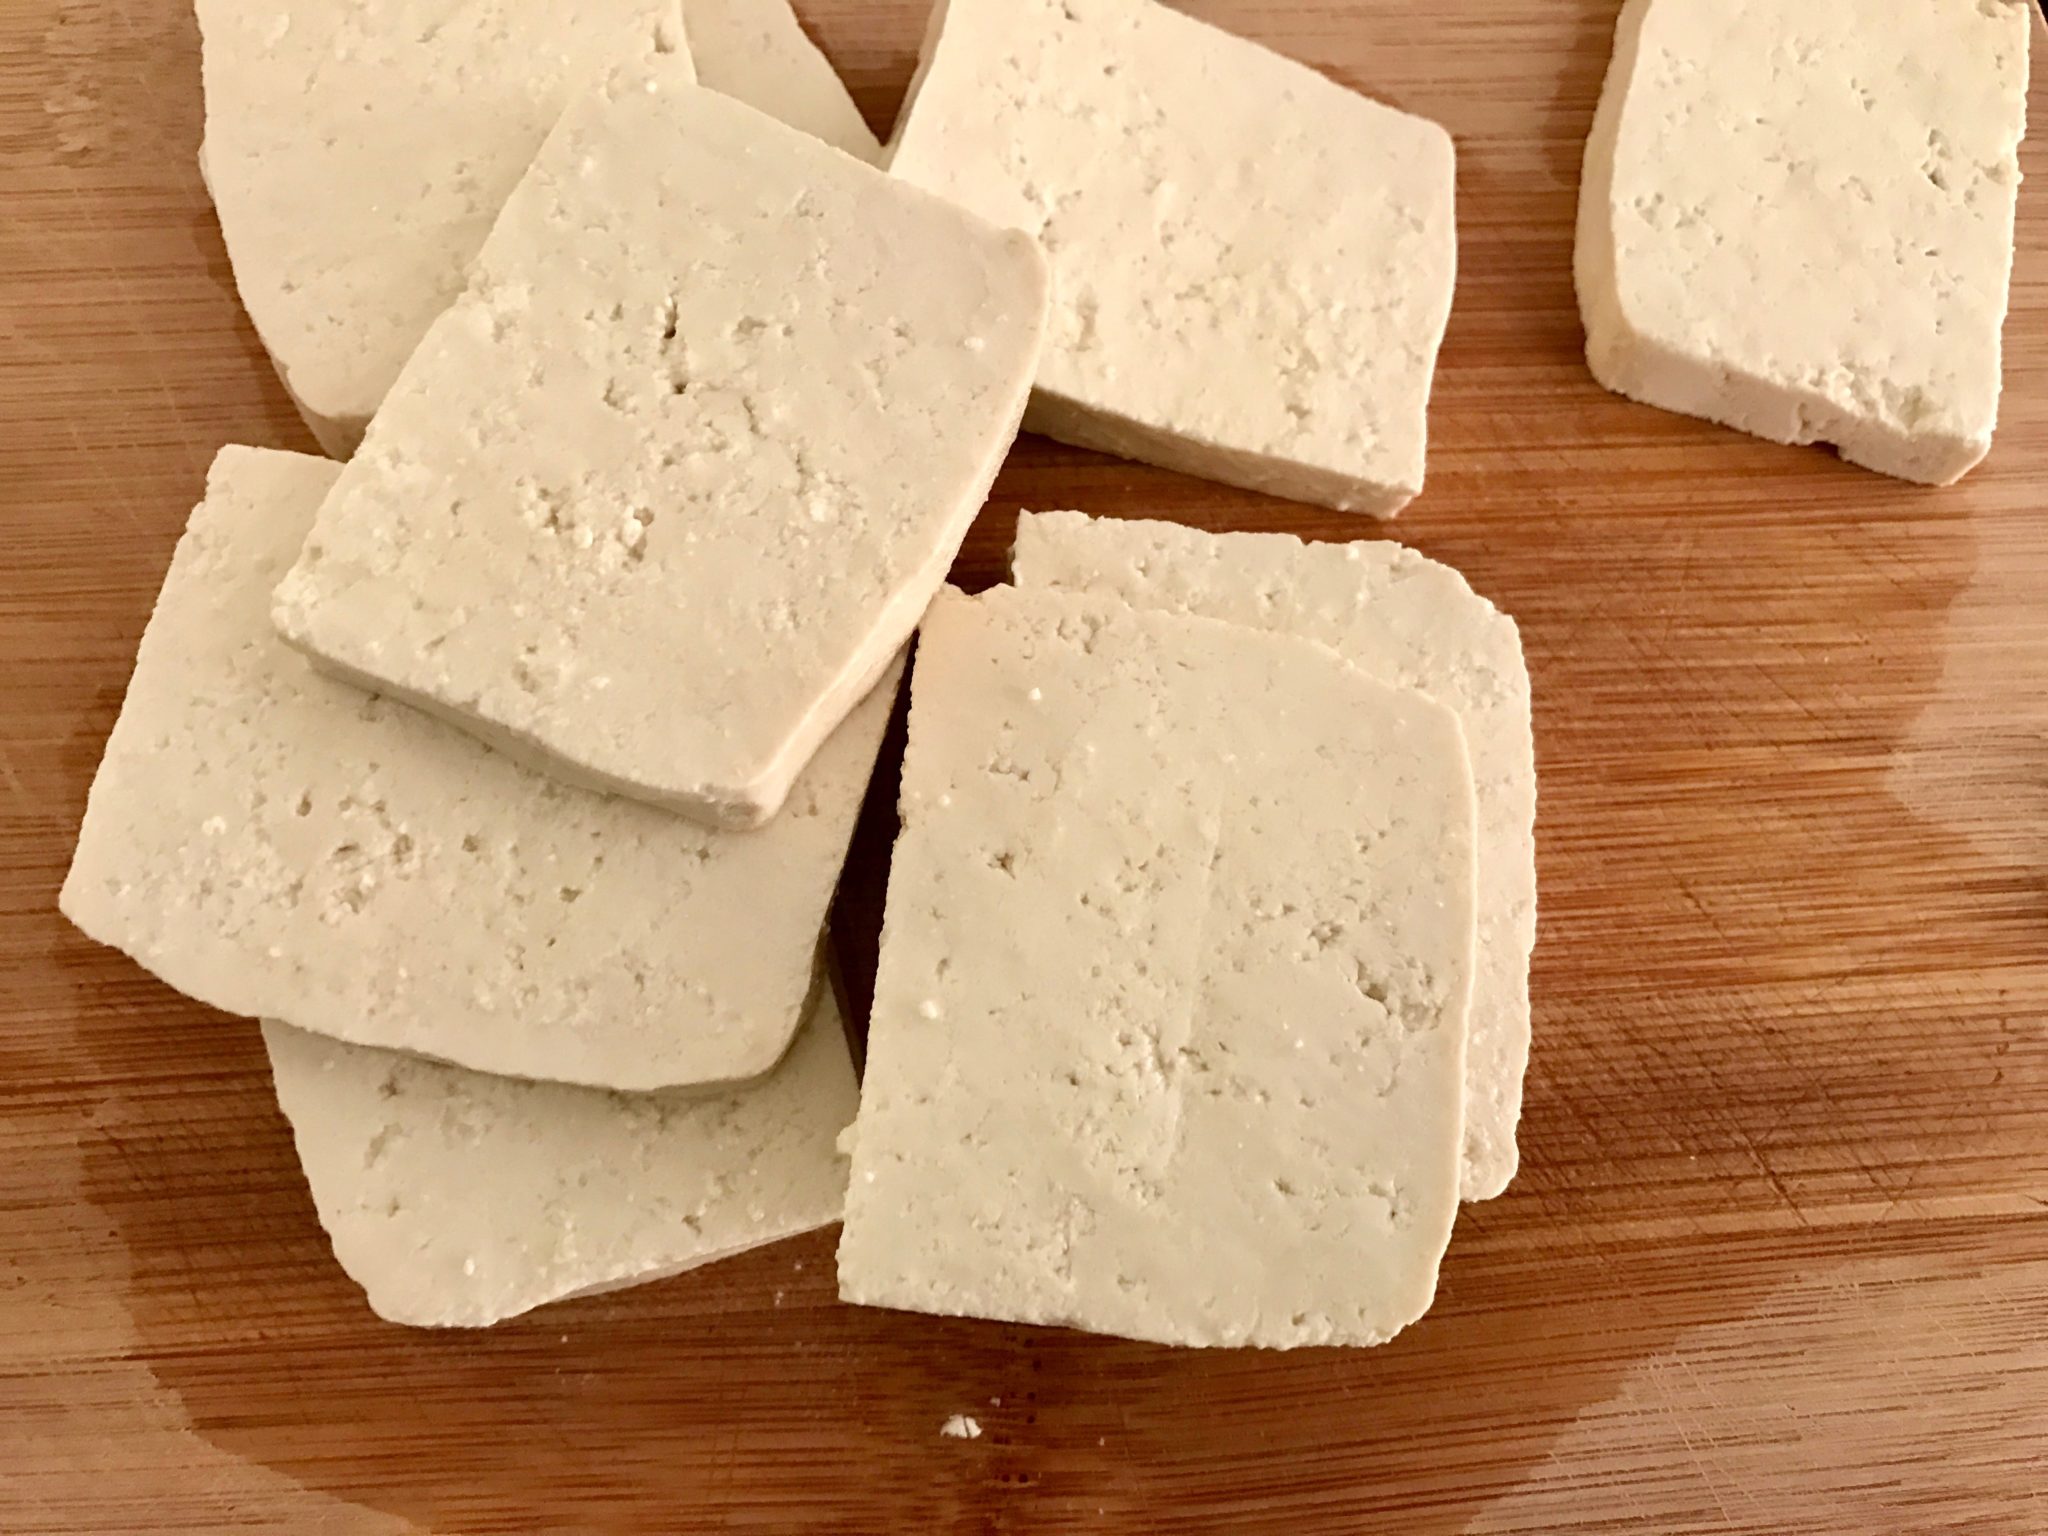 Cut the tofu into thin slice pieces